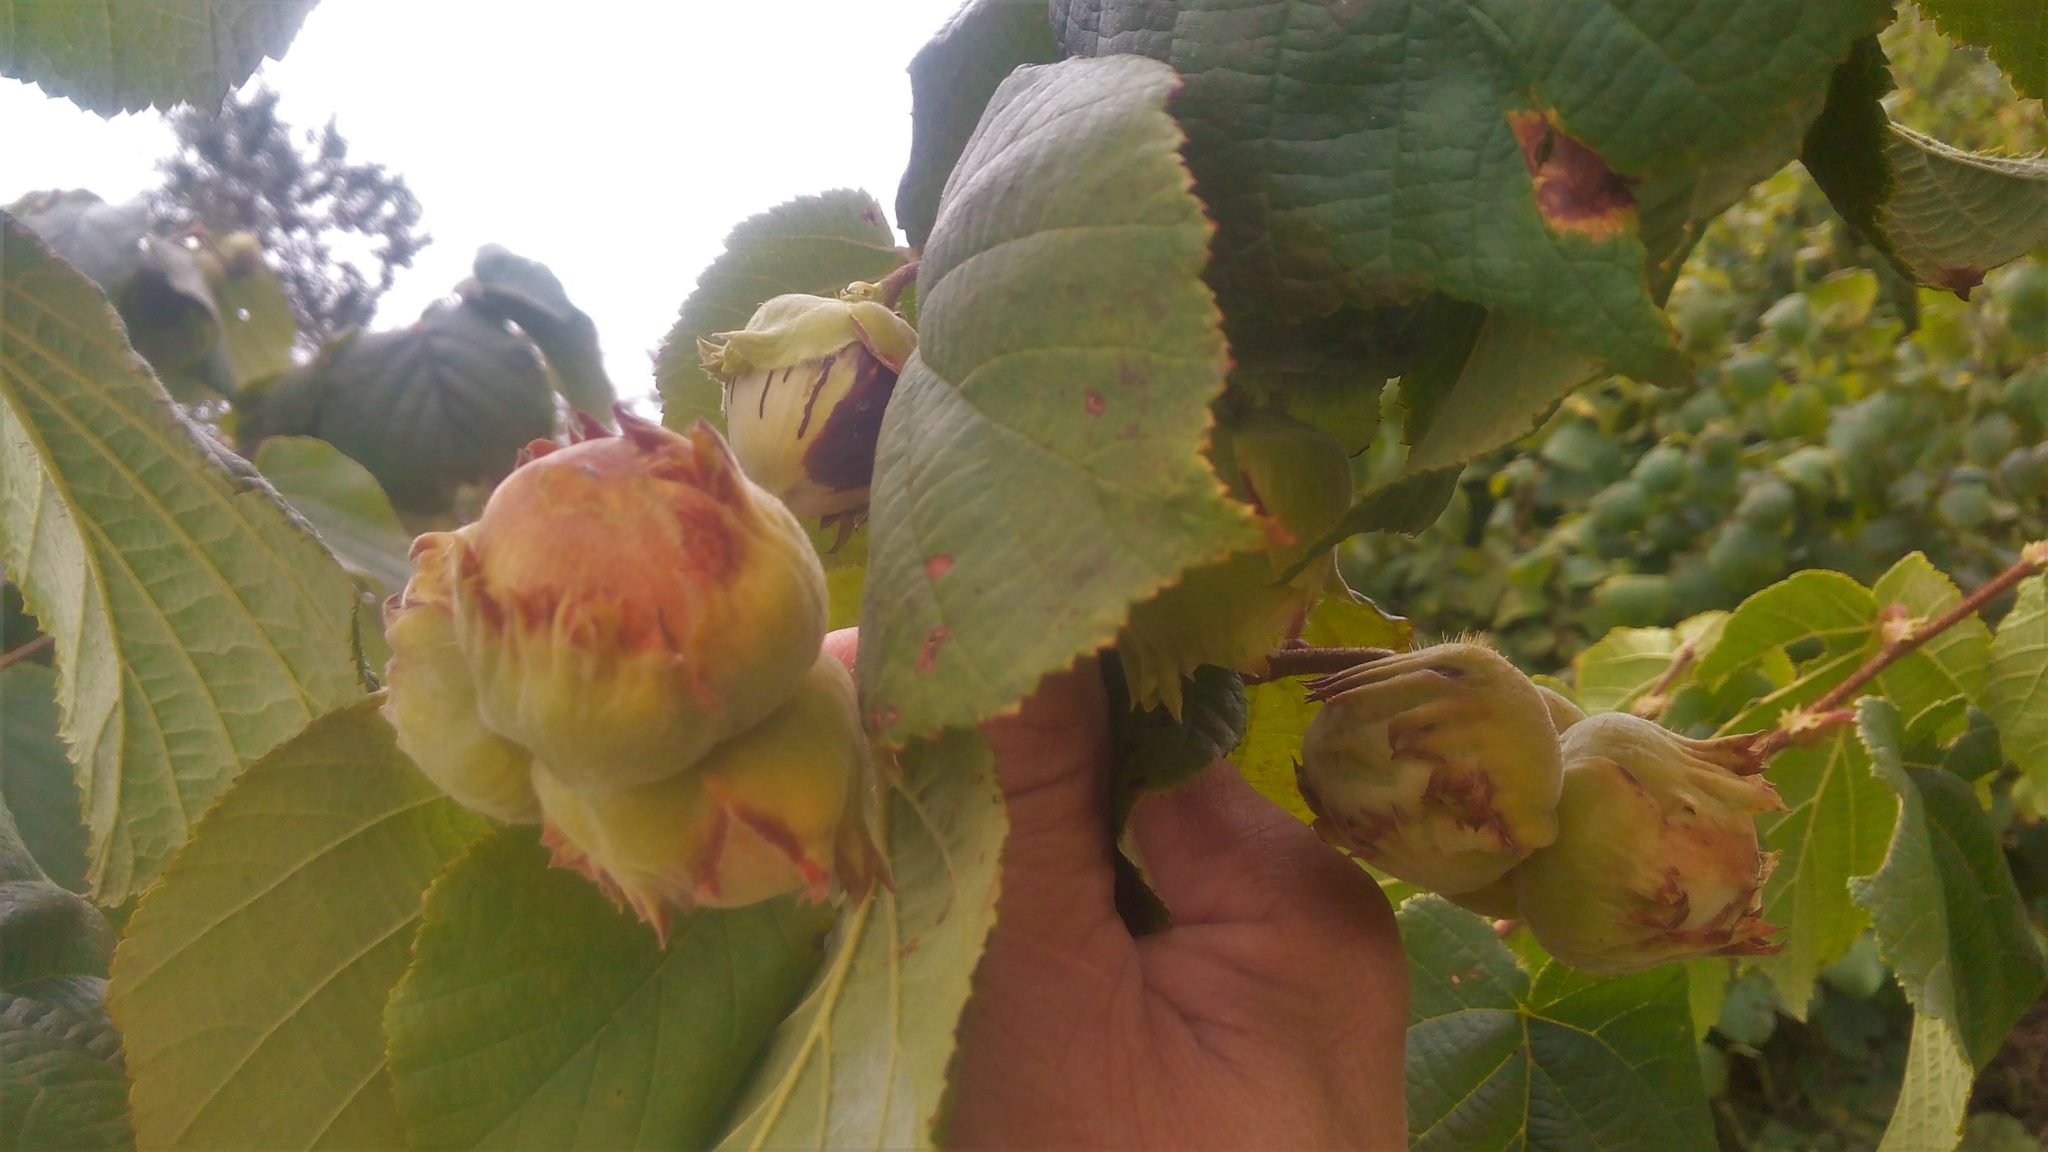  Hybrid hazel trees with jumbo grade sized nuts are successfully grown without pesticides or fungicides in USDA zones 4b/5a, in the Finger Lakes region of New York. 